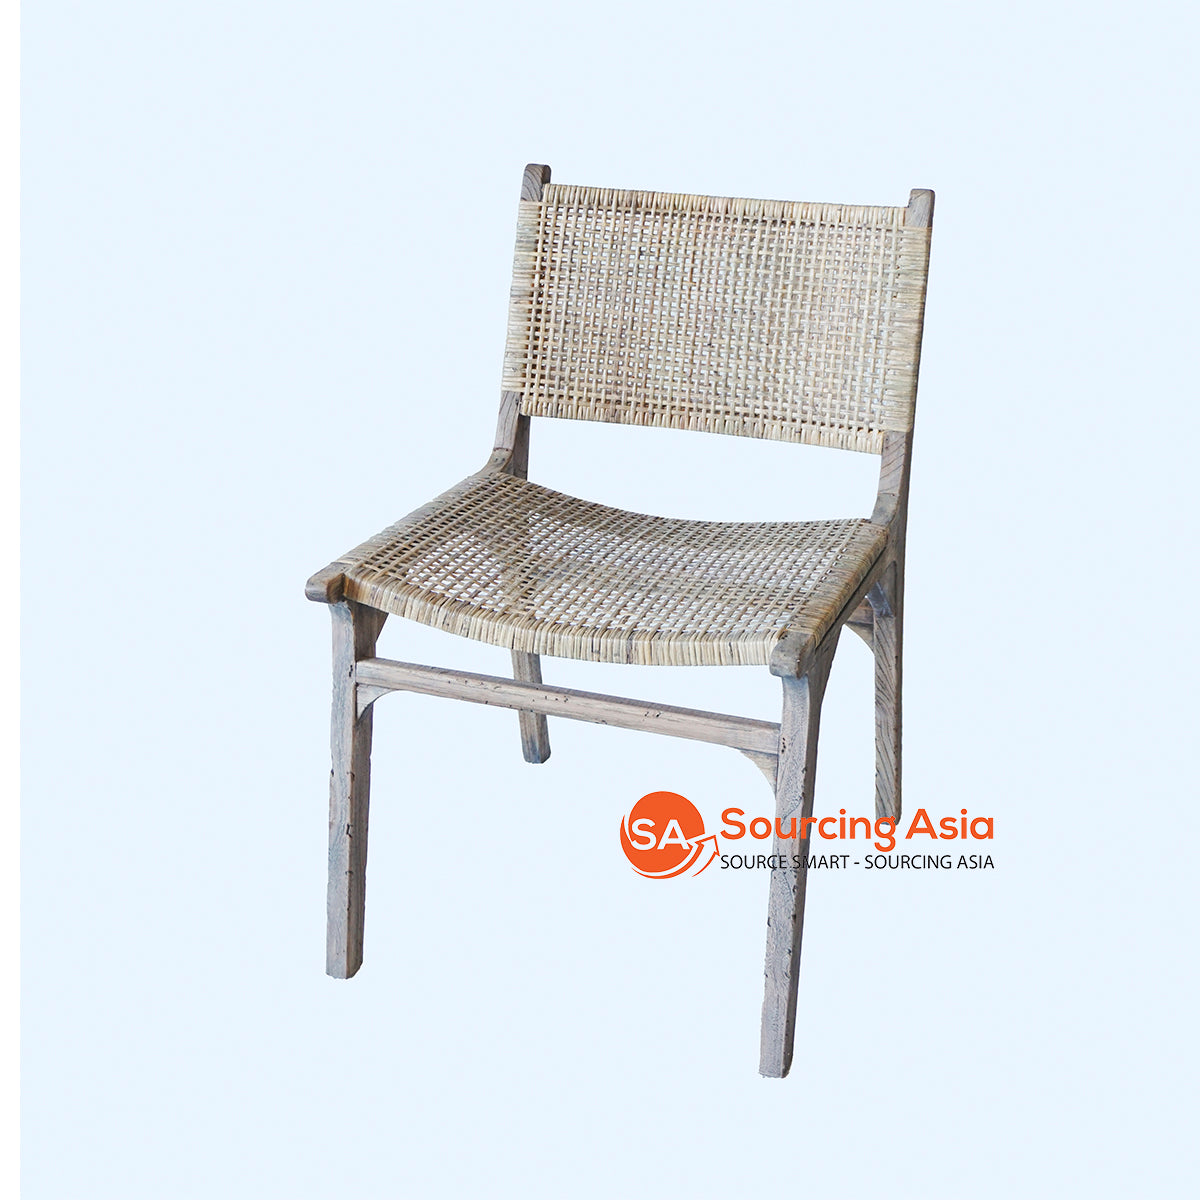 AKB014 ANTIQUE TEAK CHAIR WITH RATTAN BACK AND SEAT